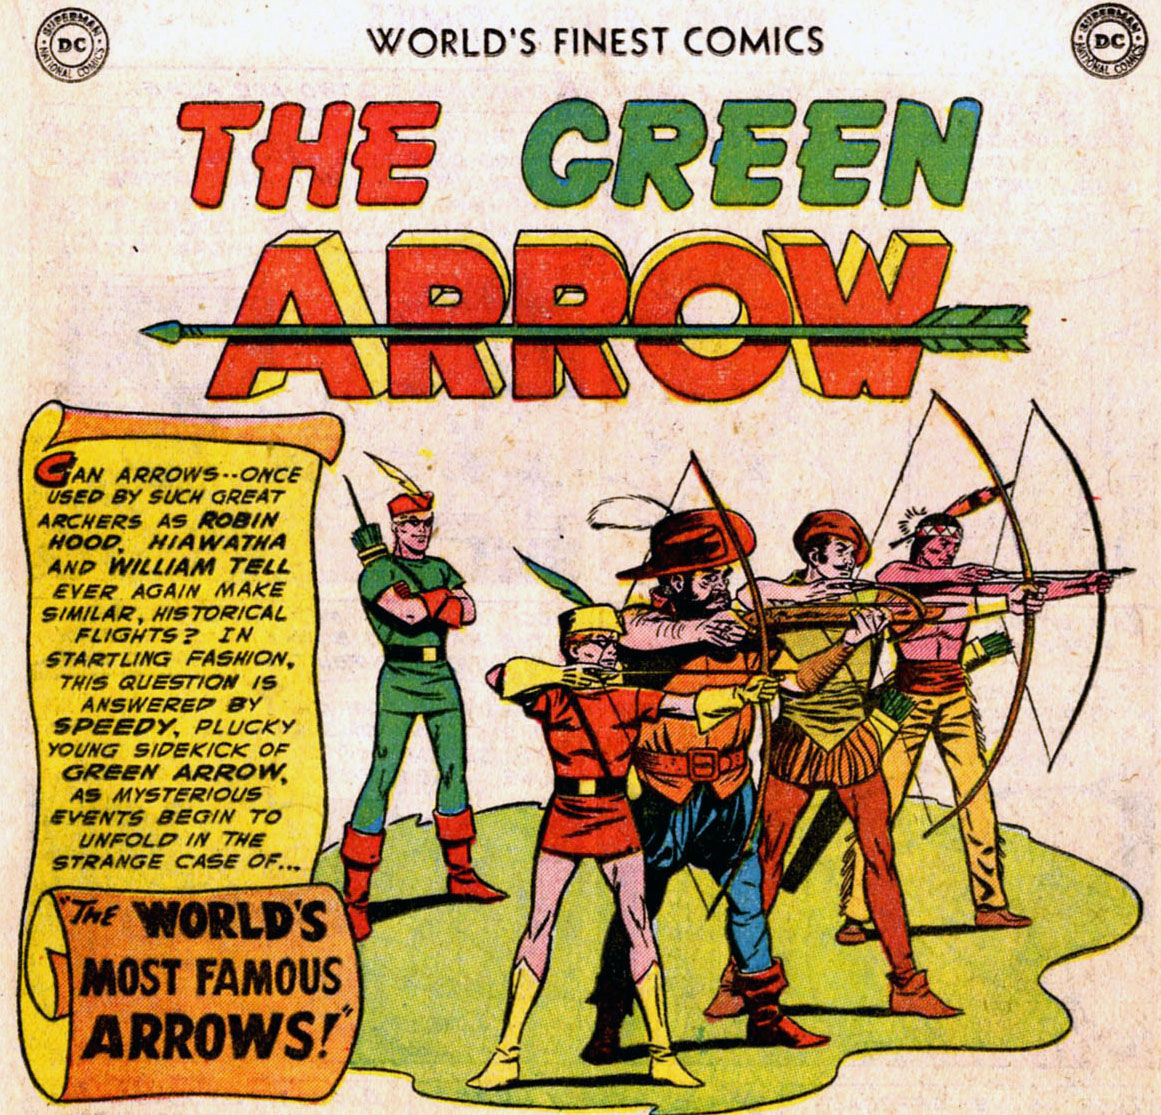 Title page of Green Arrow story in World's Finest Comics #75, art by George Papp